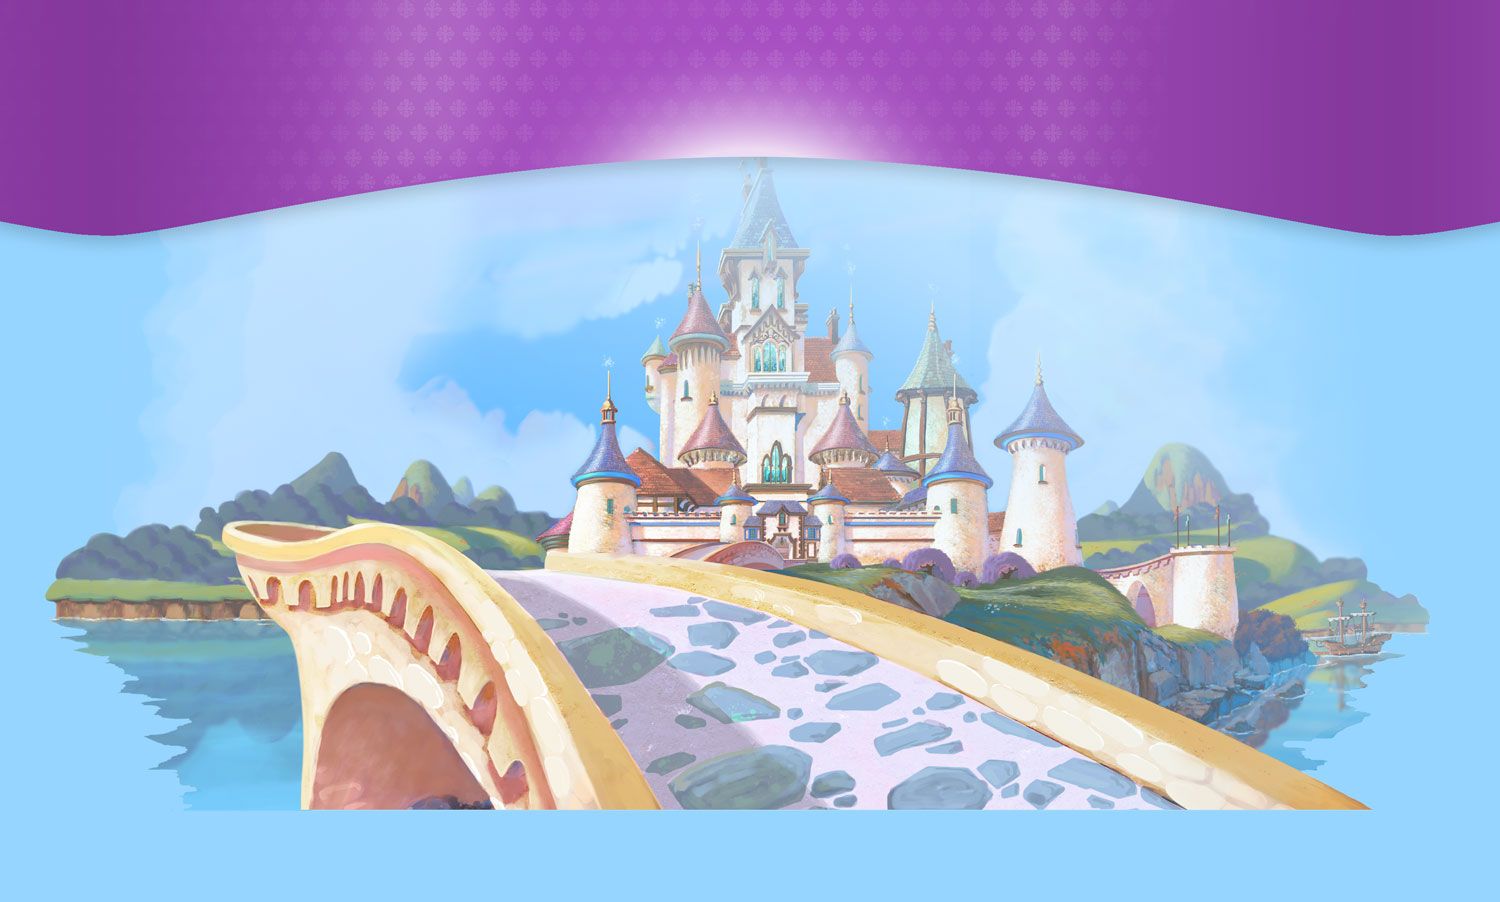 Sofia The First Wallpapers